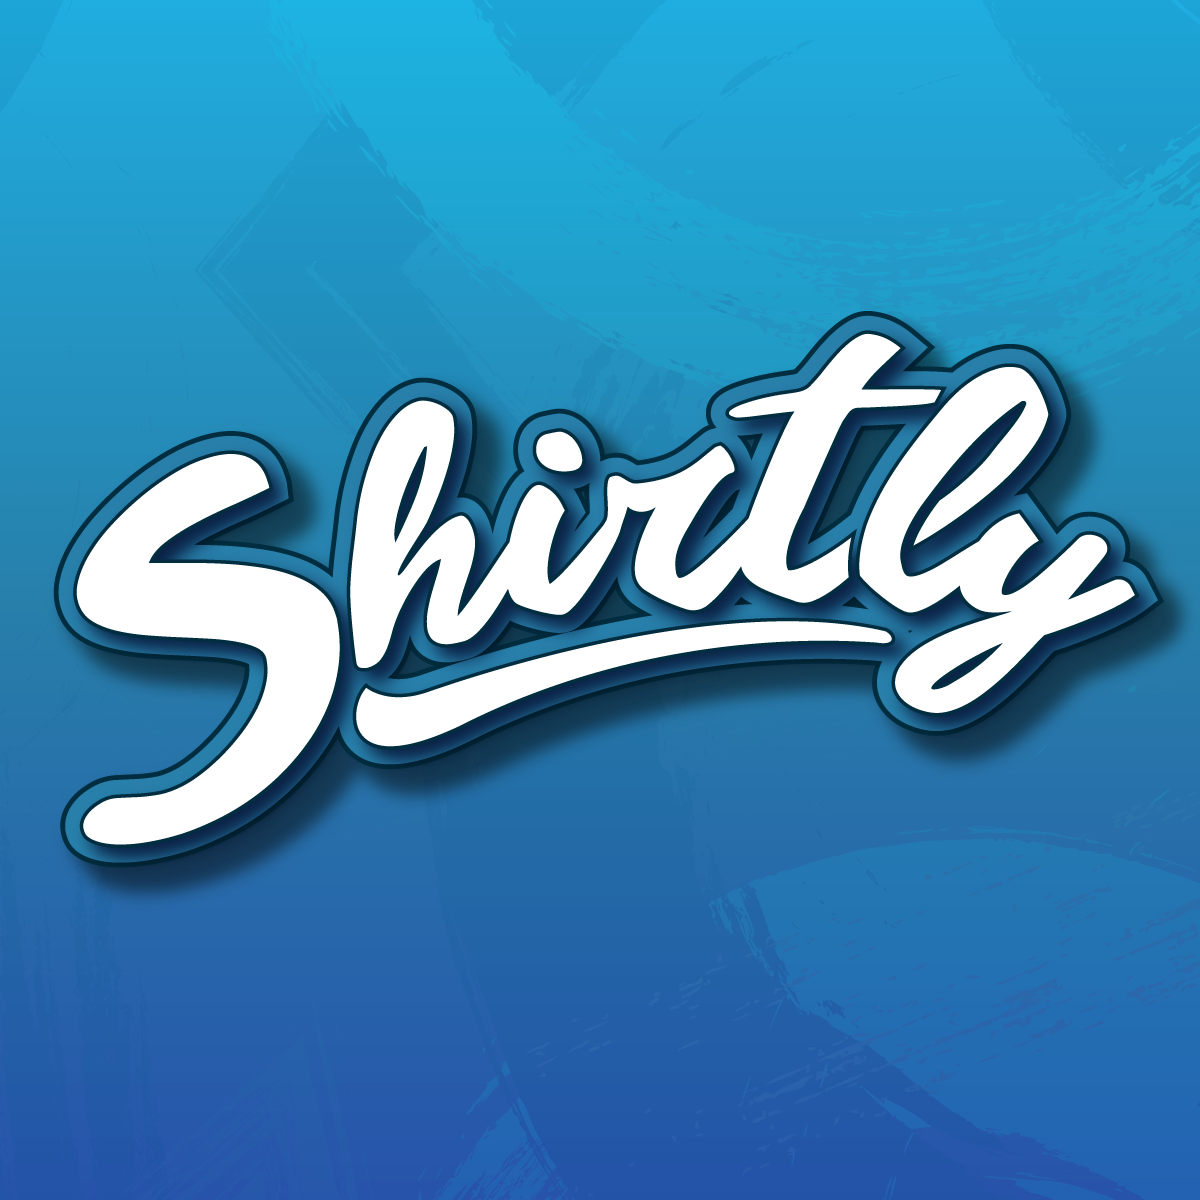 Hire Shopify Experts to integrate Shirtly â€‘ Print on Demand app into a Shopify store